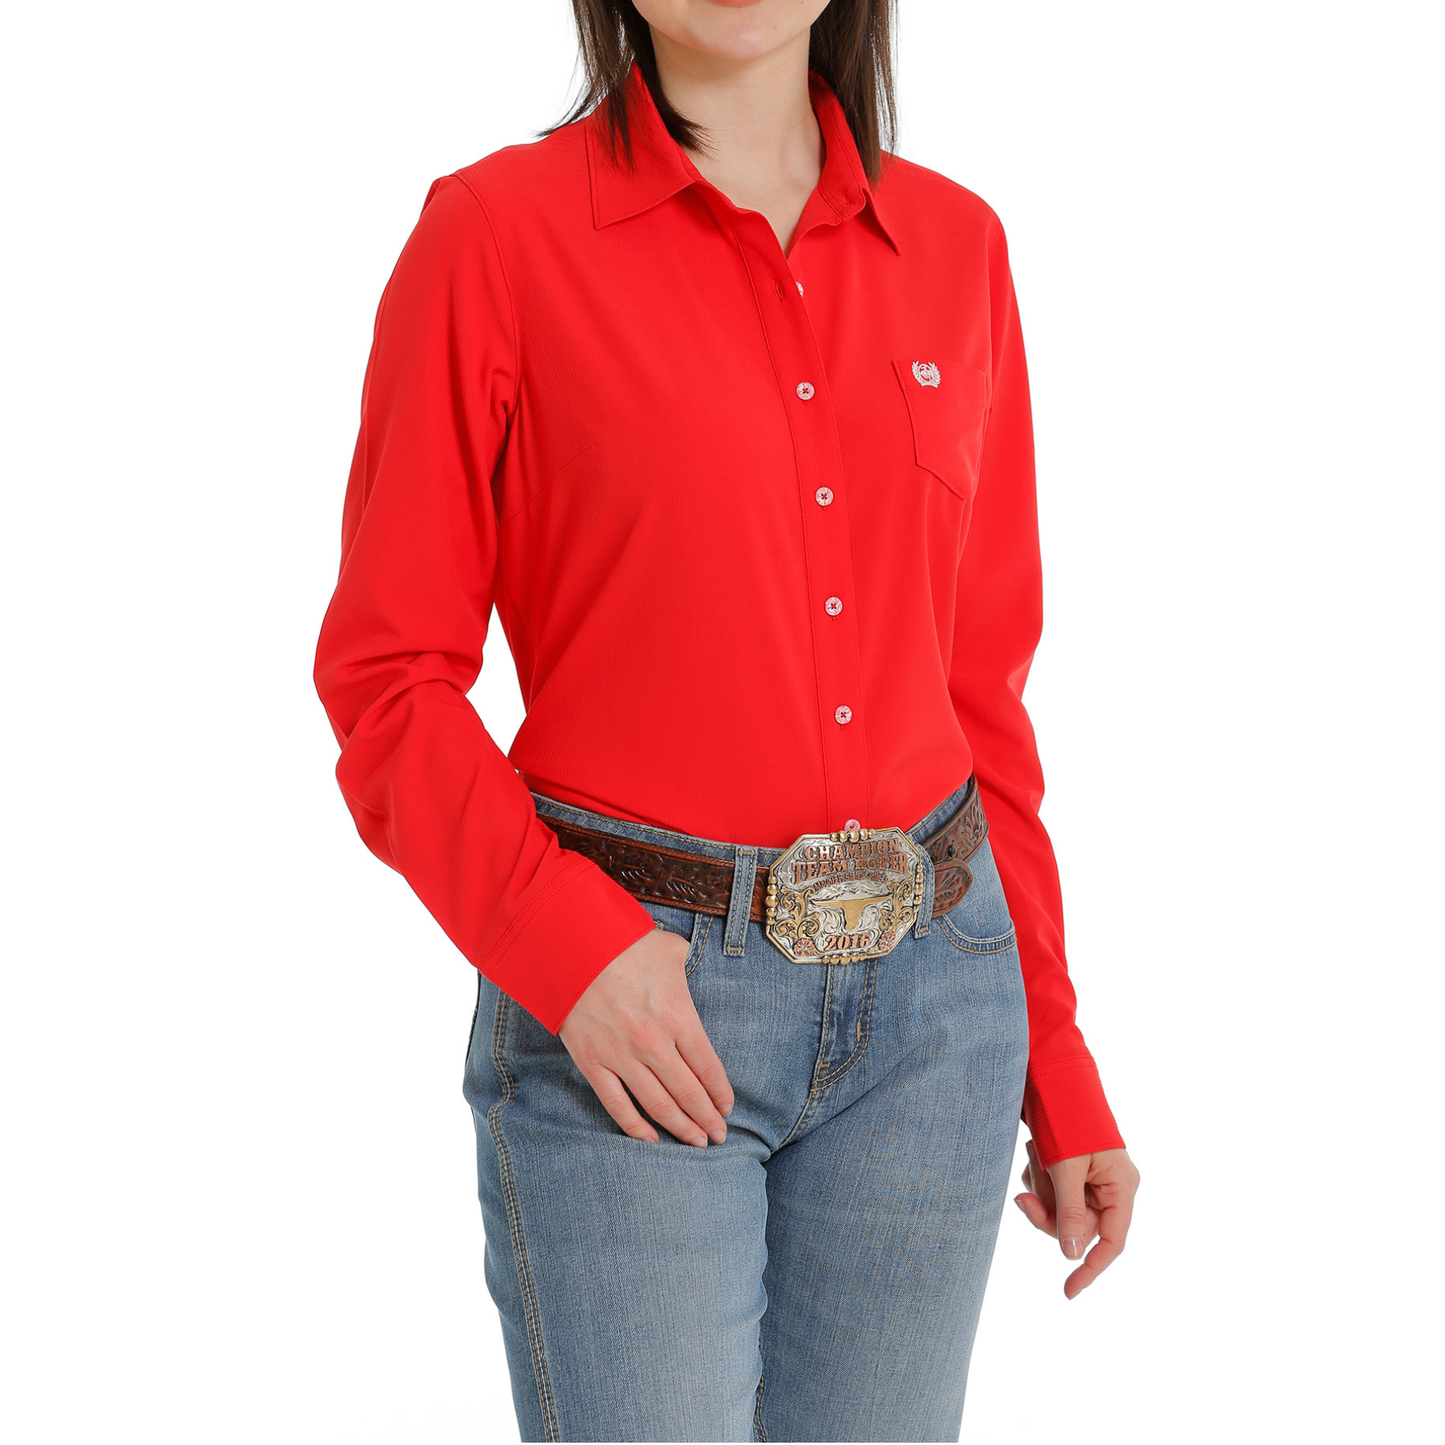 Cinch® Ladies Solid Red Button Down Shirt MSW9163012